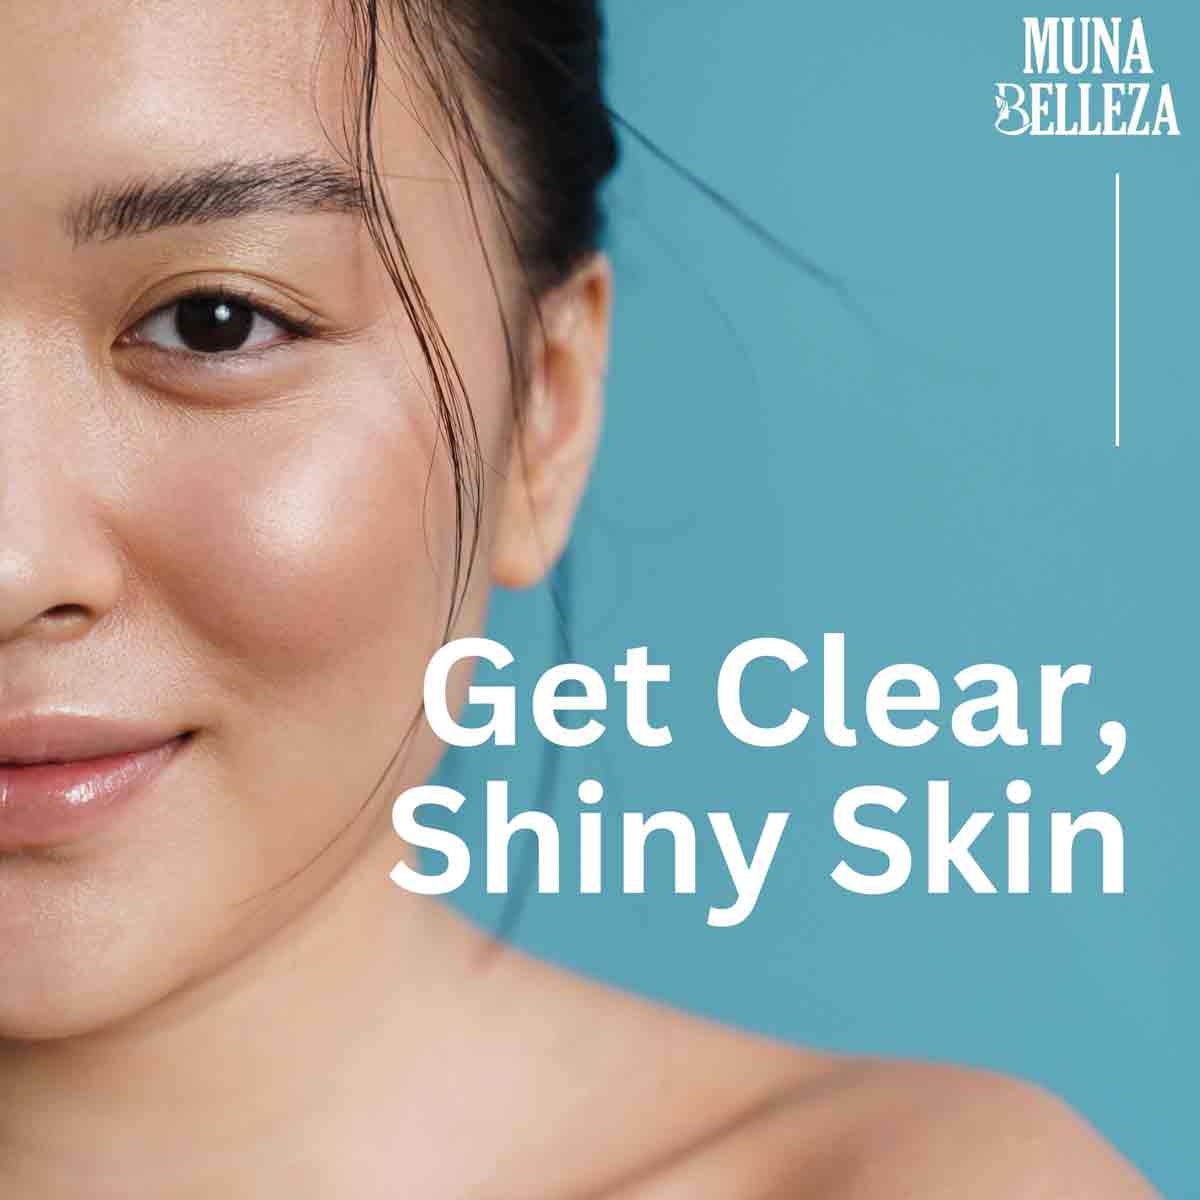 Close-up of a woman's half-face with clear, glowing skin and the text 'Get Clear, Shiny Skin' beside the Muna Belleza logo.